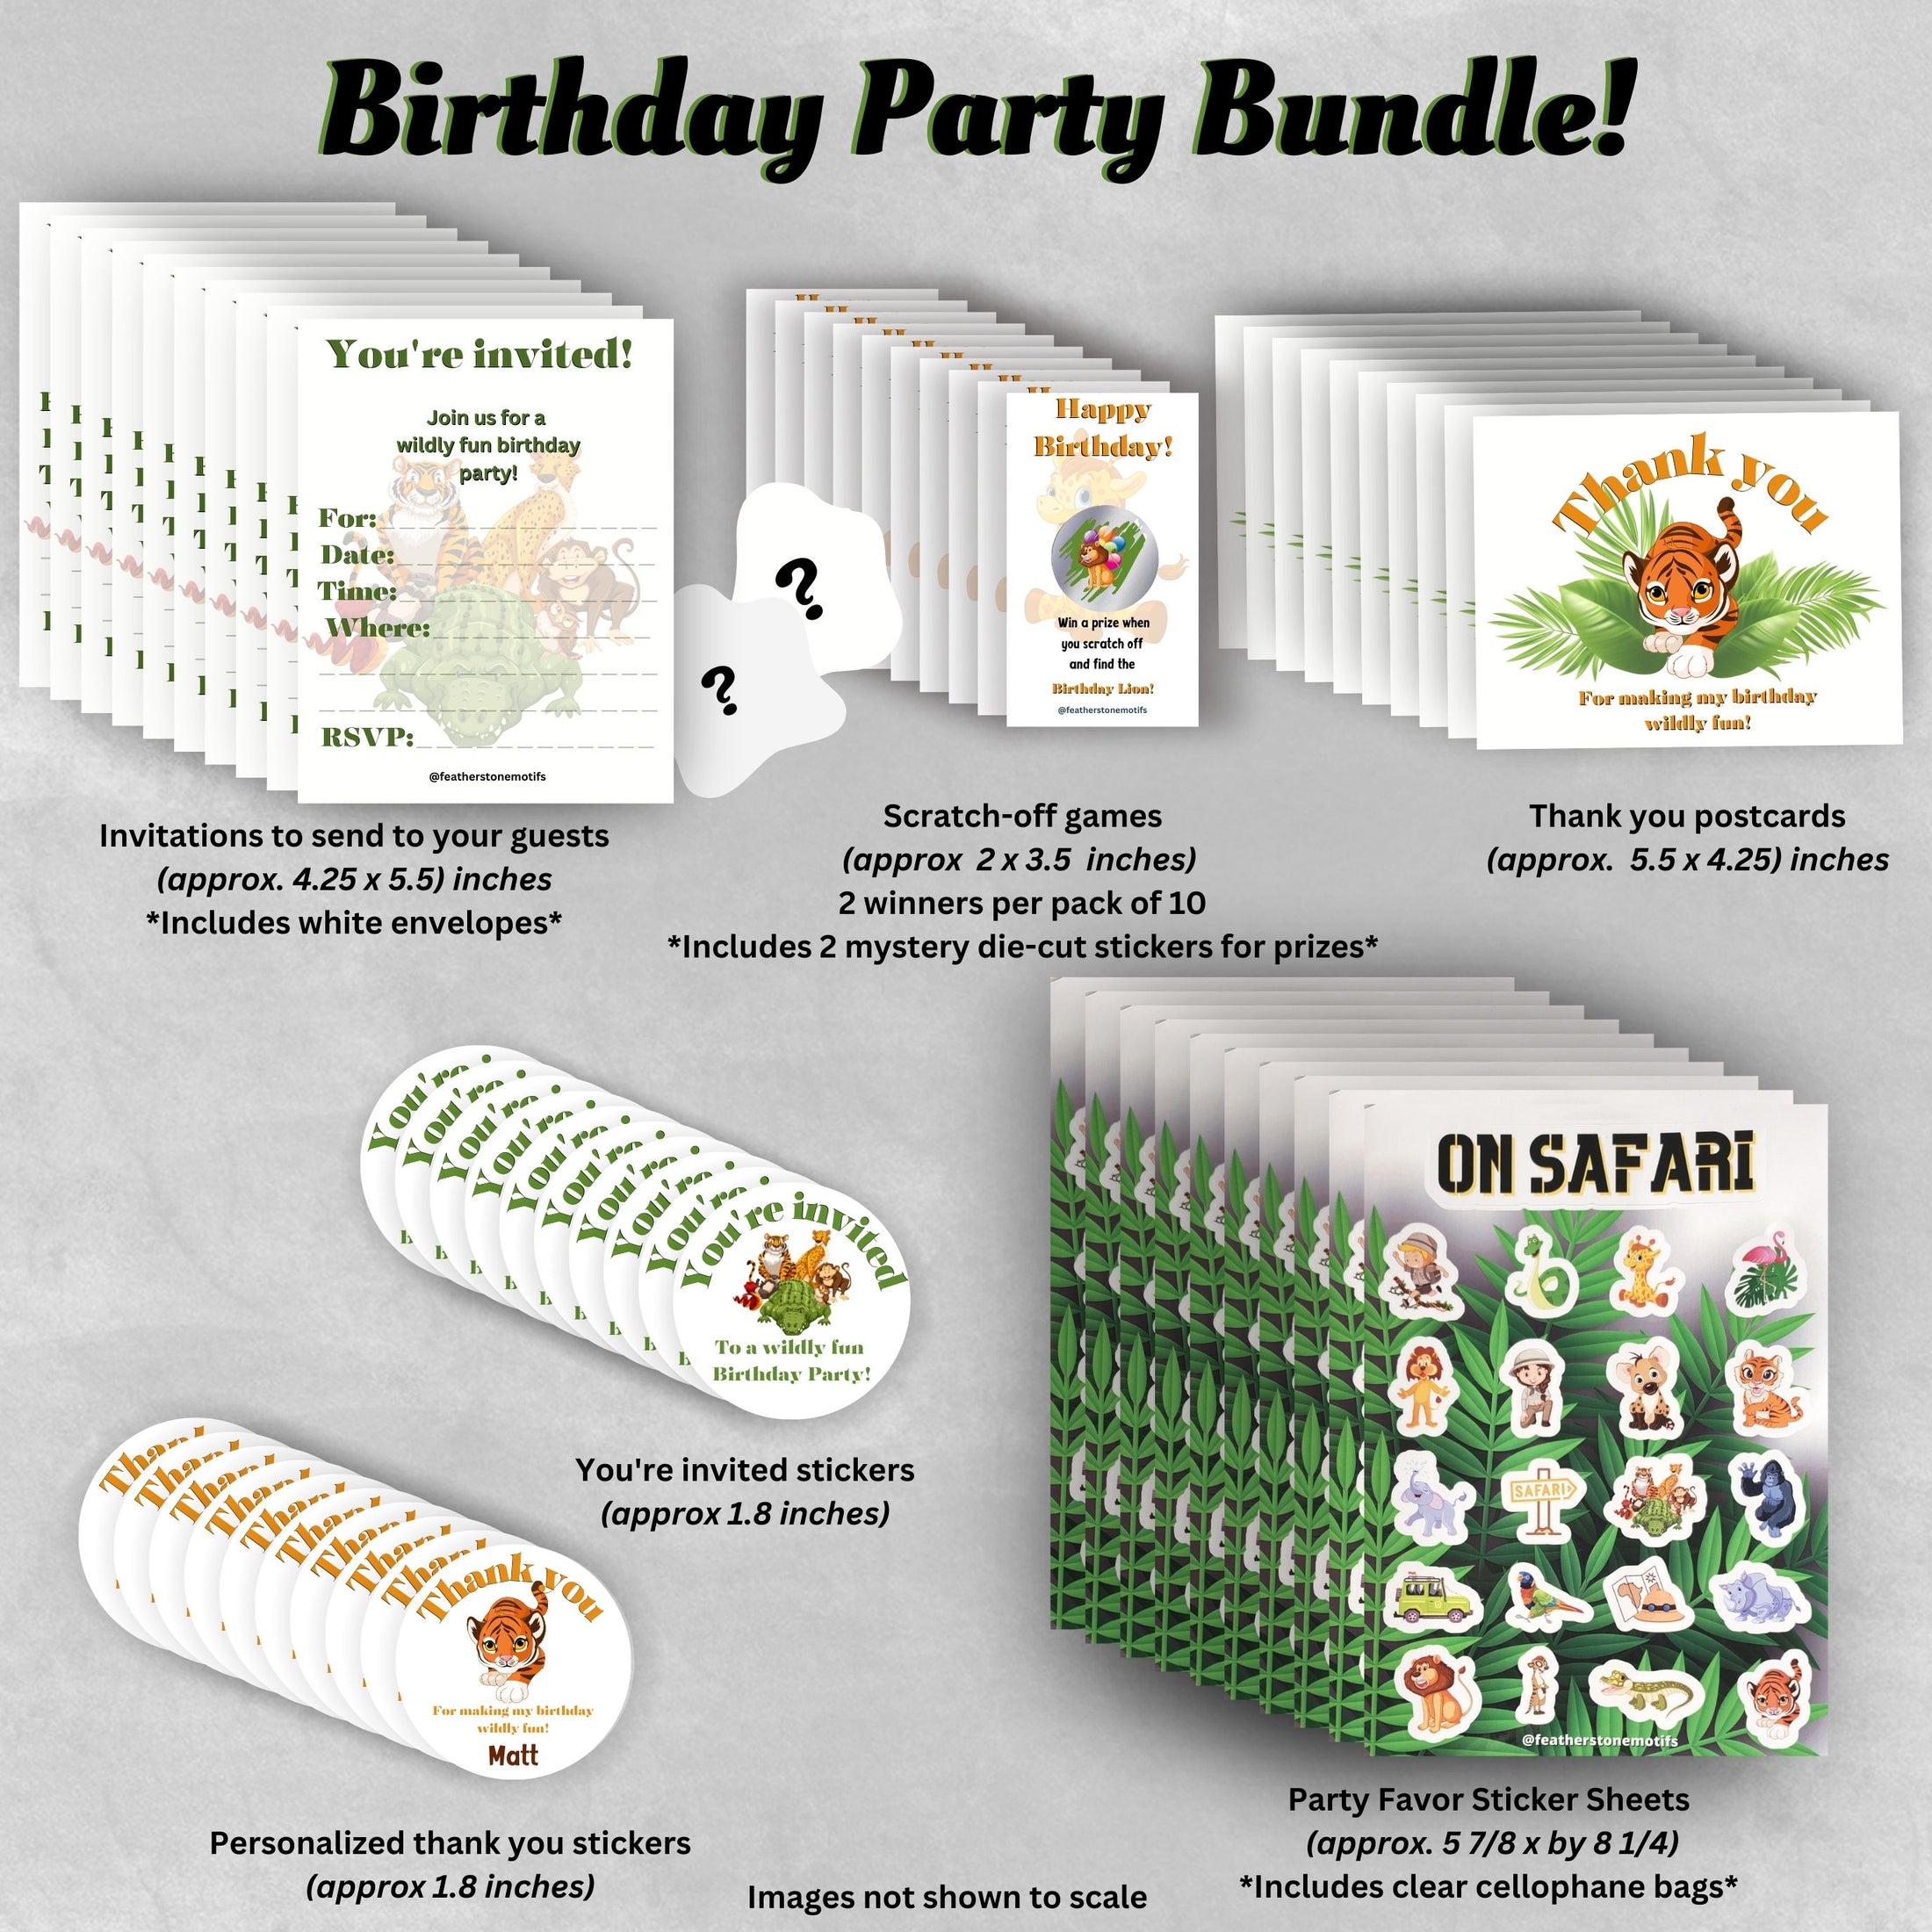 This cover image shows the stickers, scratch-off cards, invitations, postcards, and sticker sheets available in this bundle.